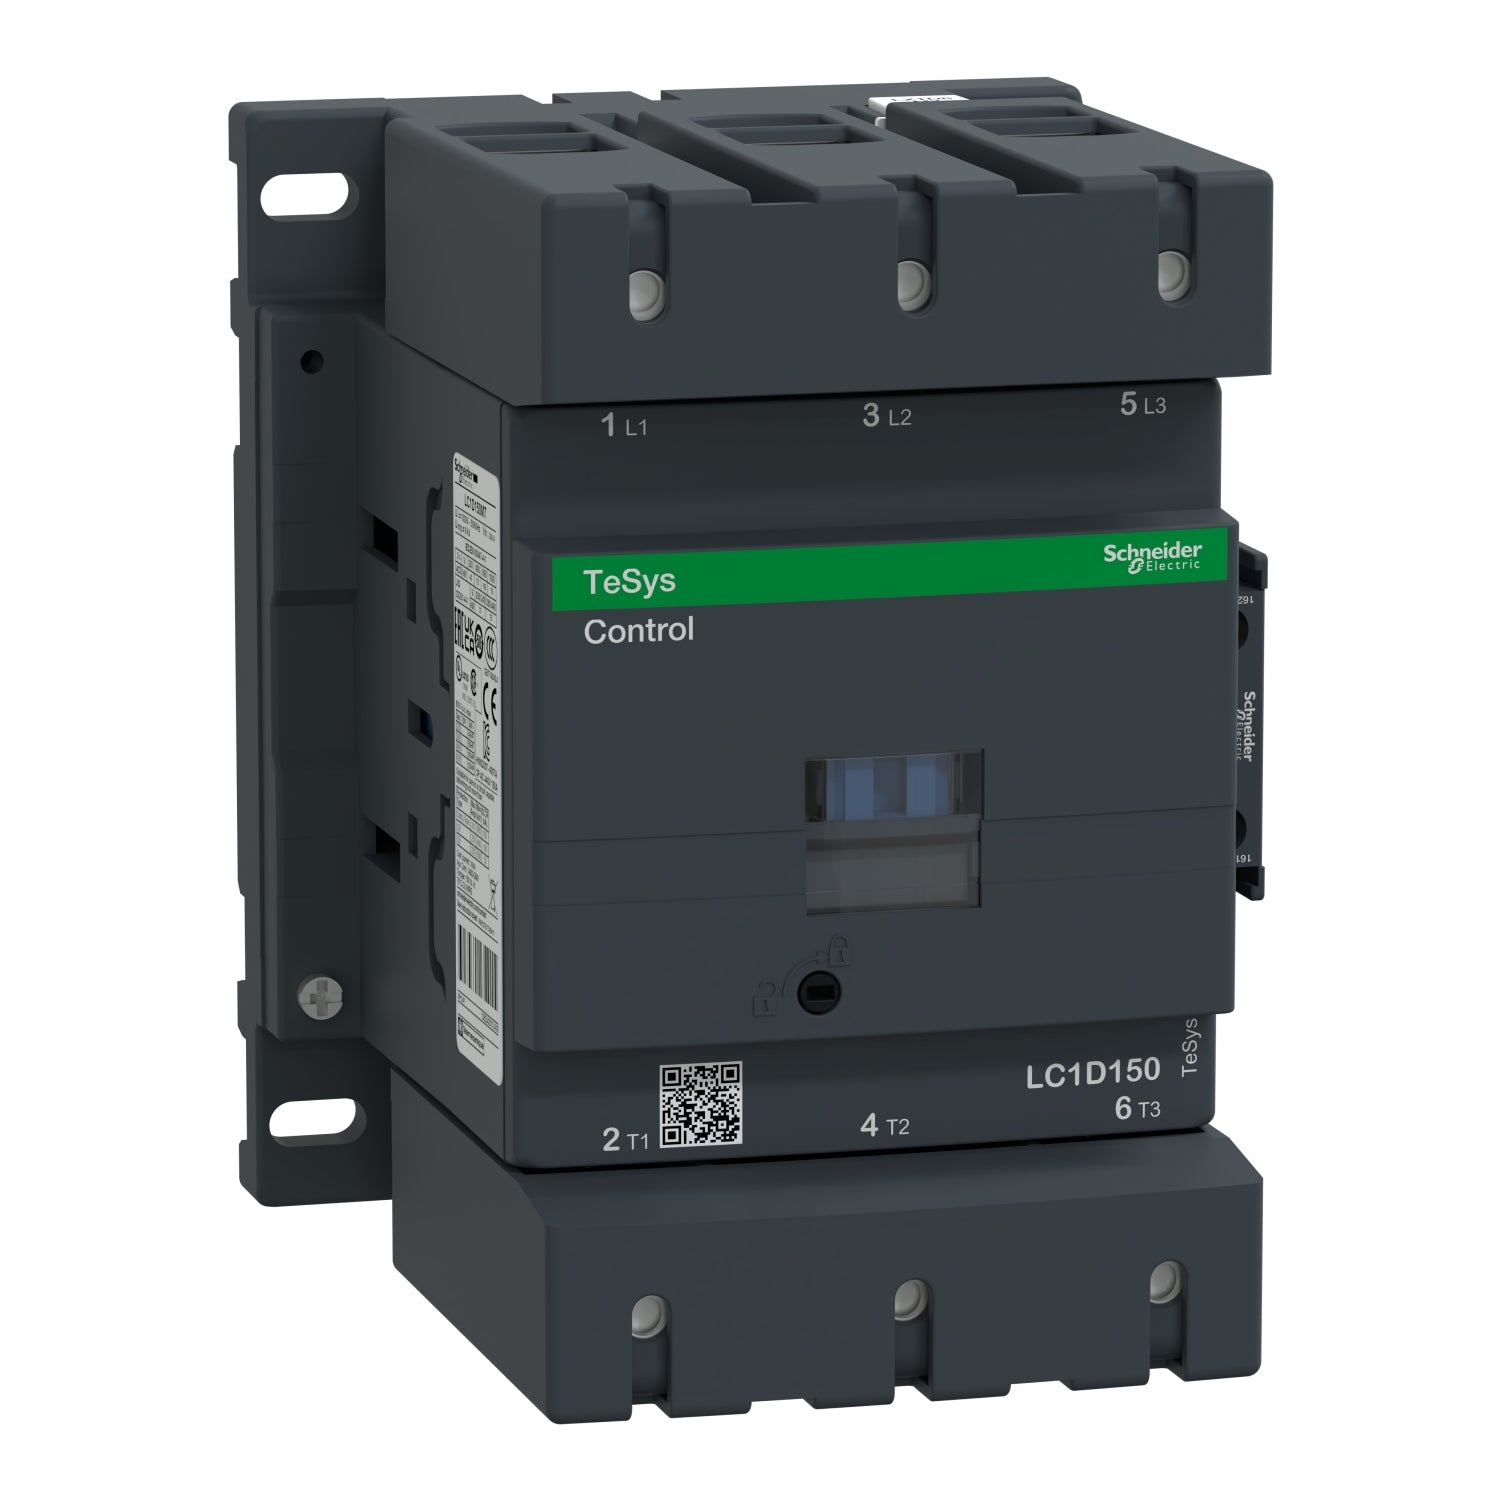 LC1D150G7 | Schneider Electric | IEC contactor, TeSys Deca, nonreversing, 150A, 100HP at 480VAC, up to 100kA SCCR, 3 phase, 3 NO, 120VAC 50/60Hz coil, open